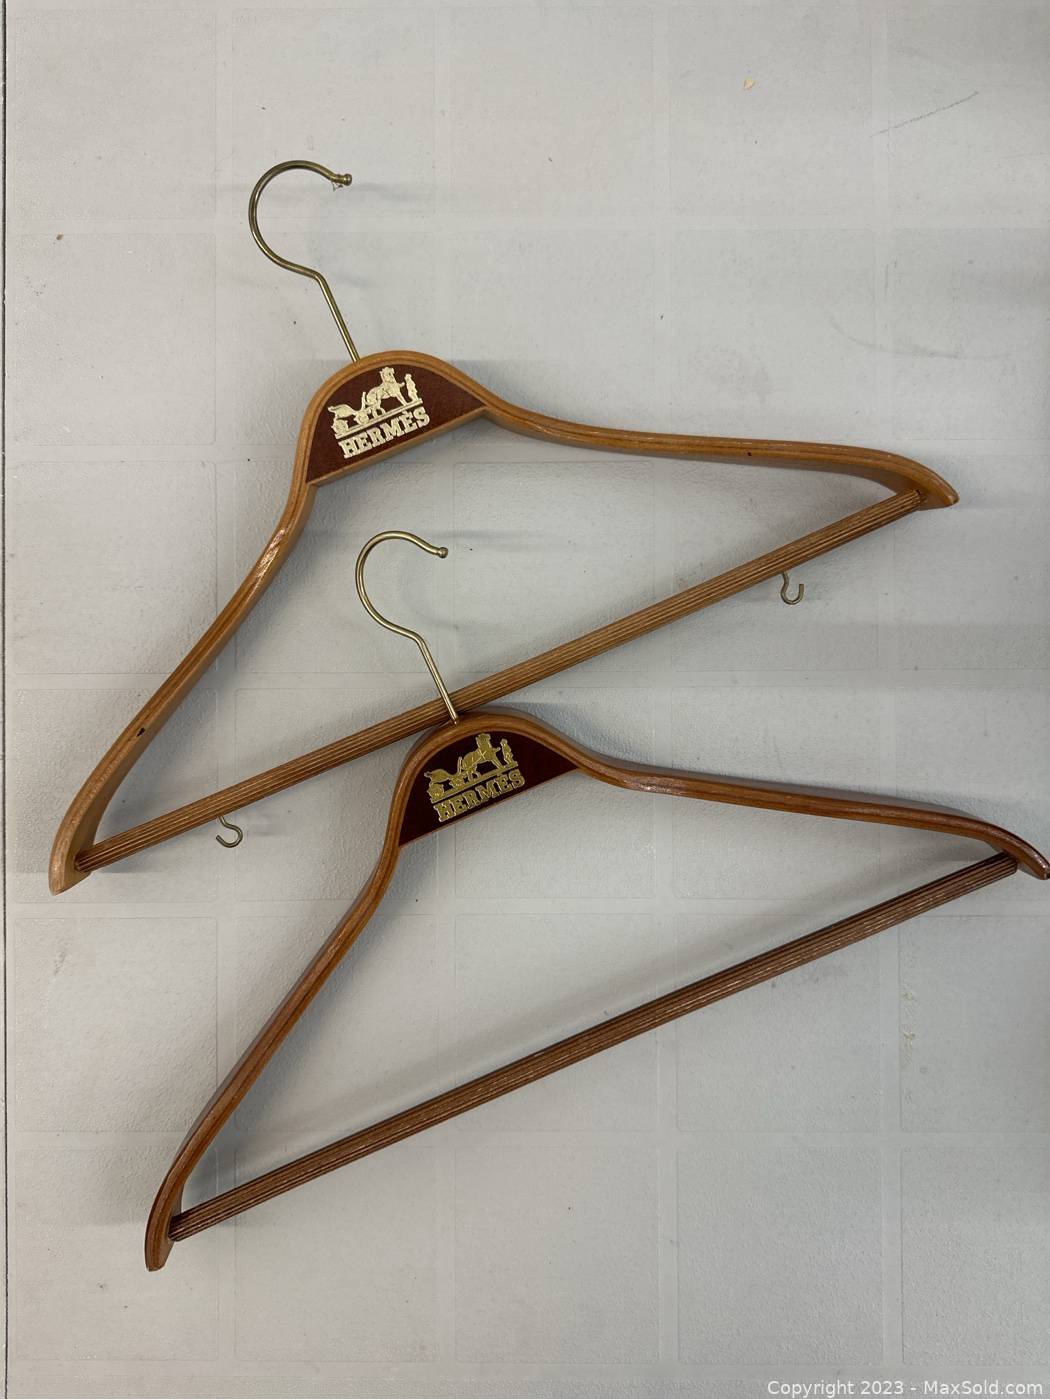 Sold at Auction: Vintage Brass Wall Hooks